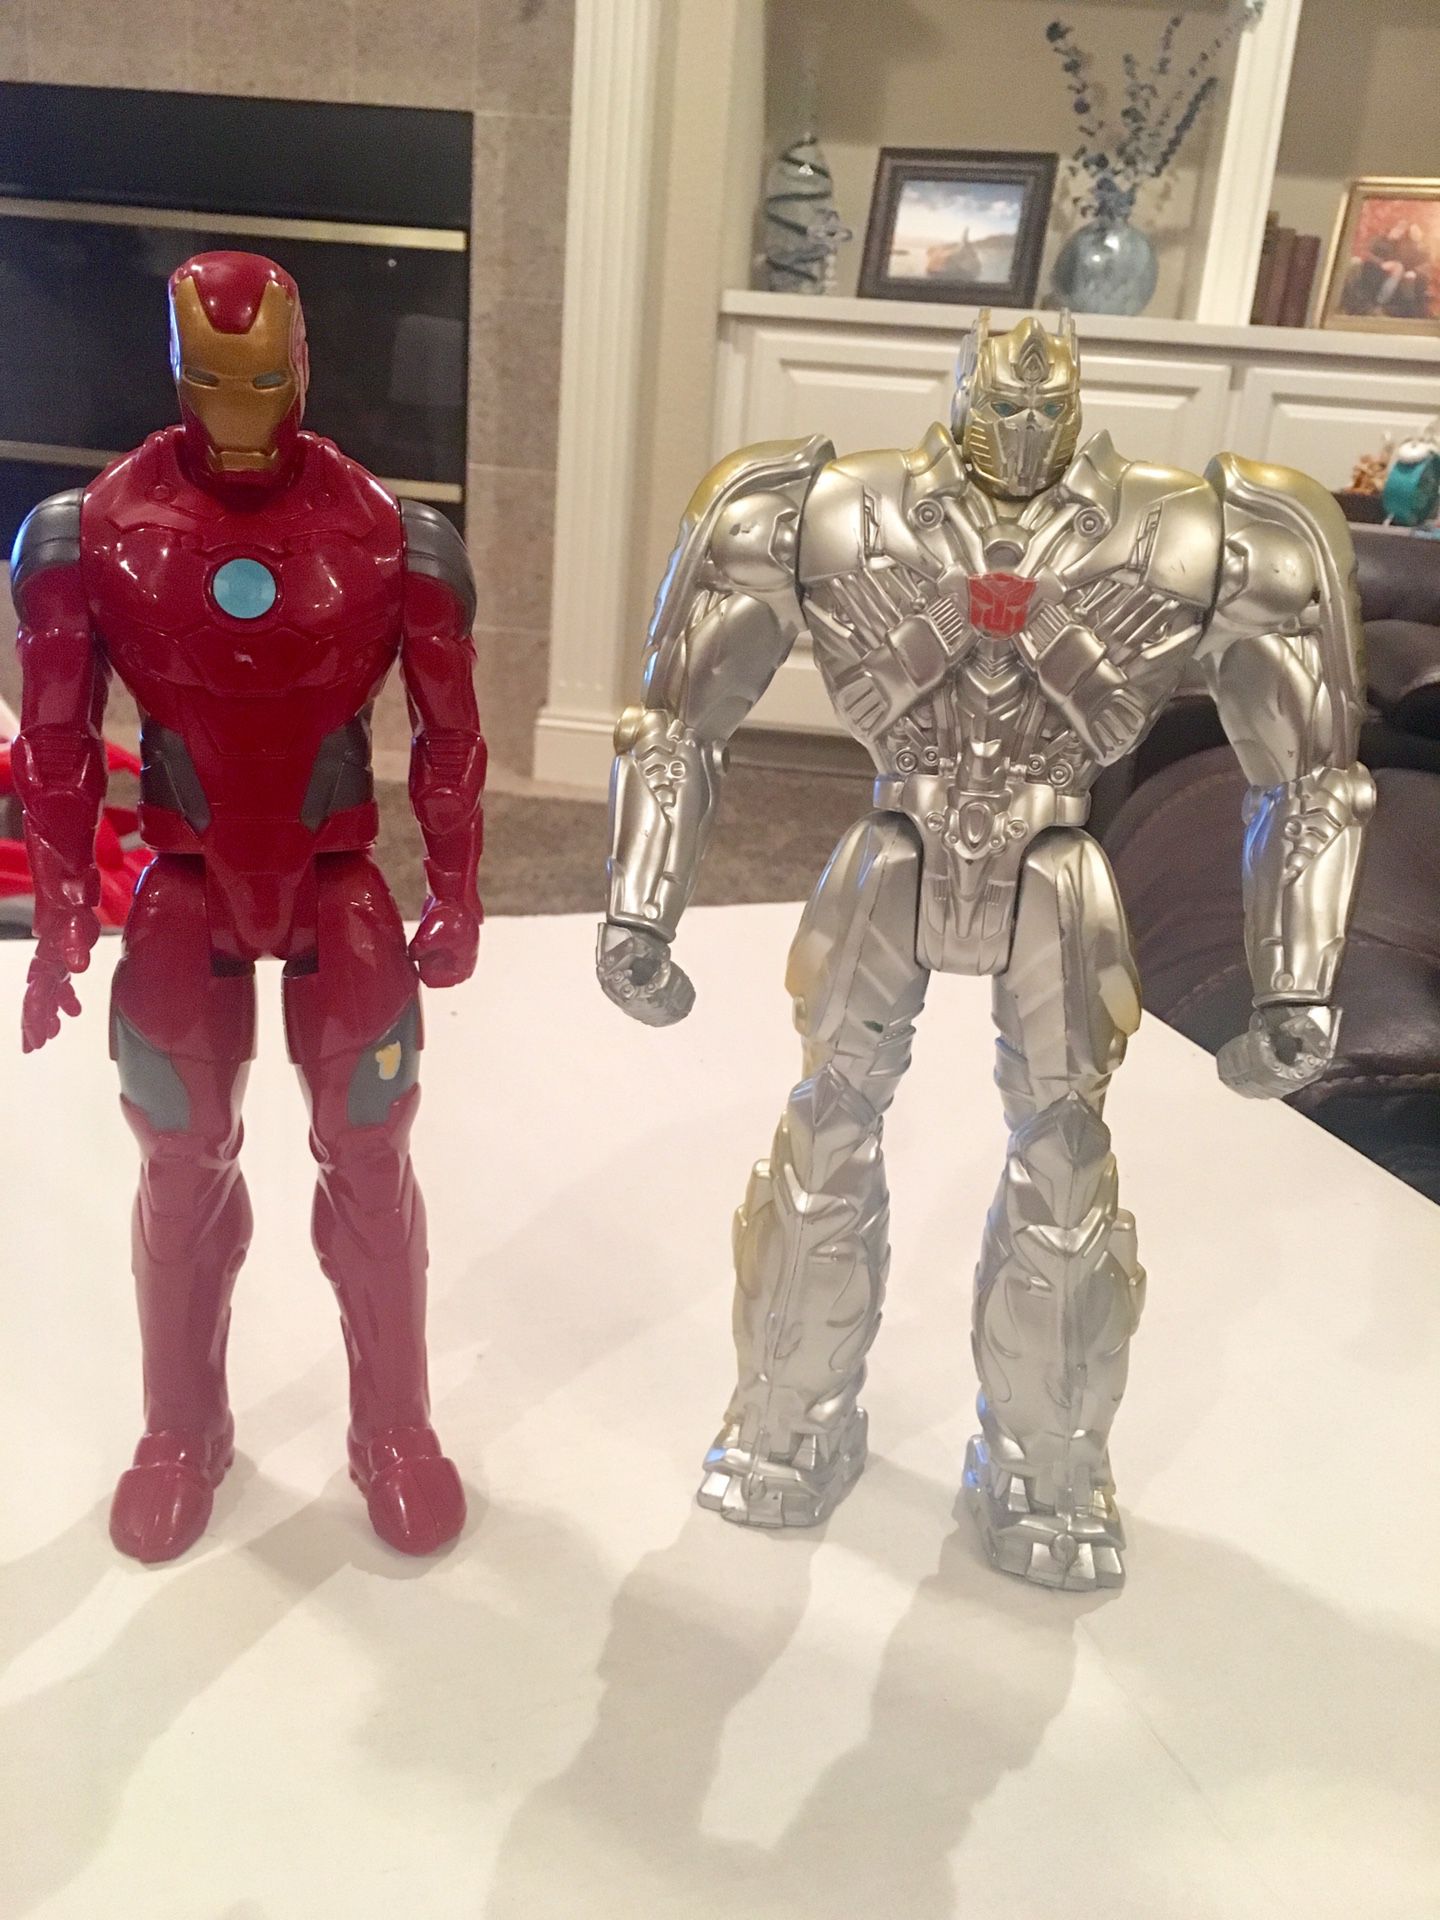 TRANSFORMER OR IRONMAN FIGURES 11 1/2 INCHES - $9.00 EACH